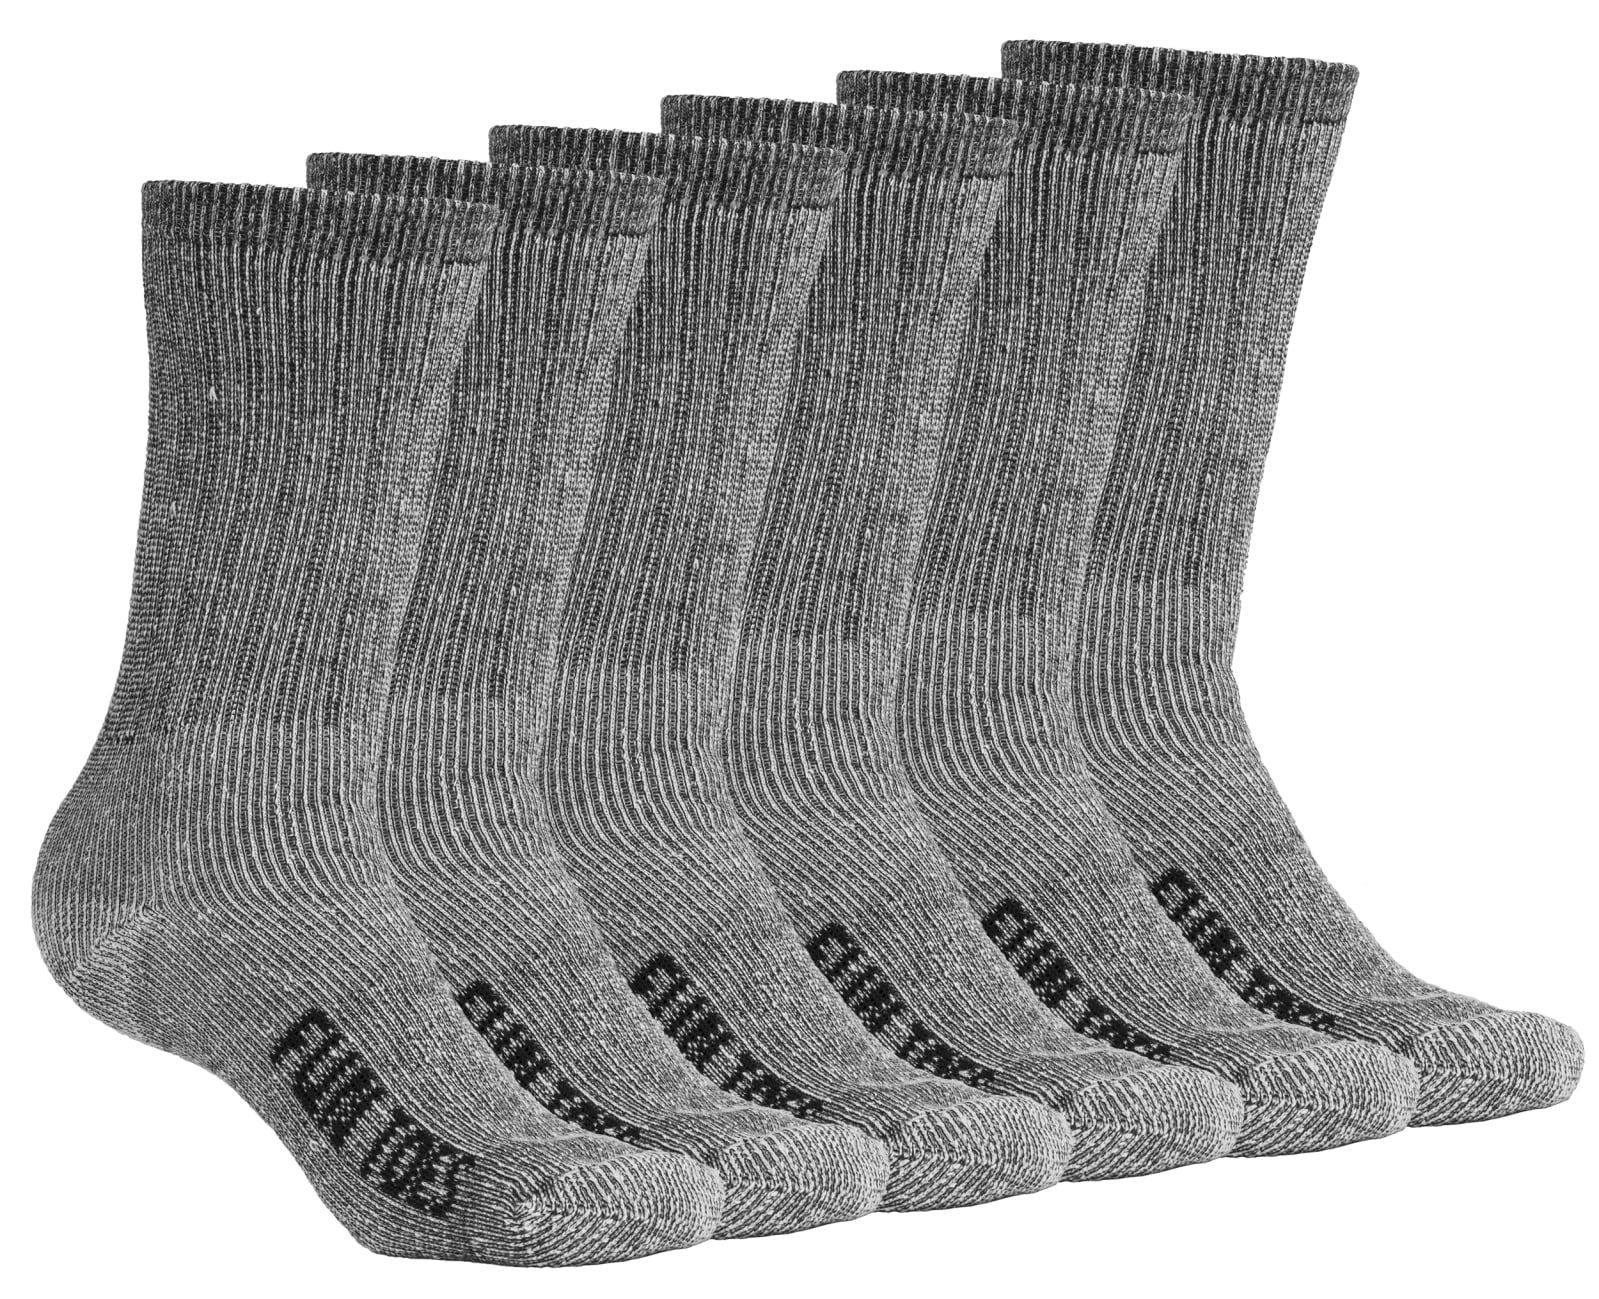 FUN TOES Womens Cotton Toe Socks-Breathable-6 PAIRS Pack-Size 9-11-Lightweight